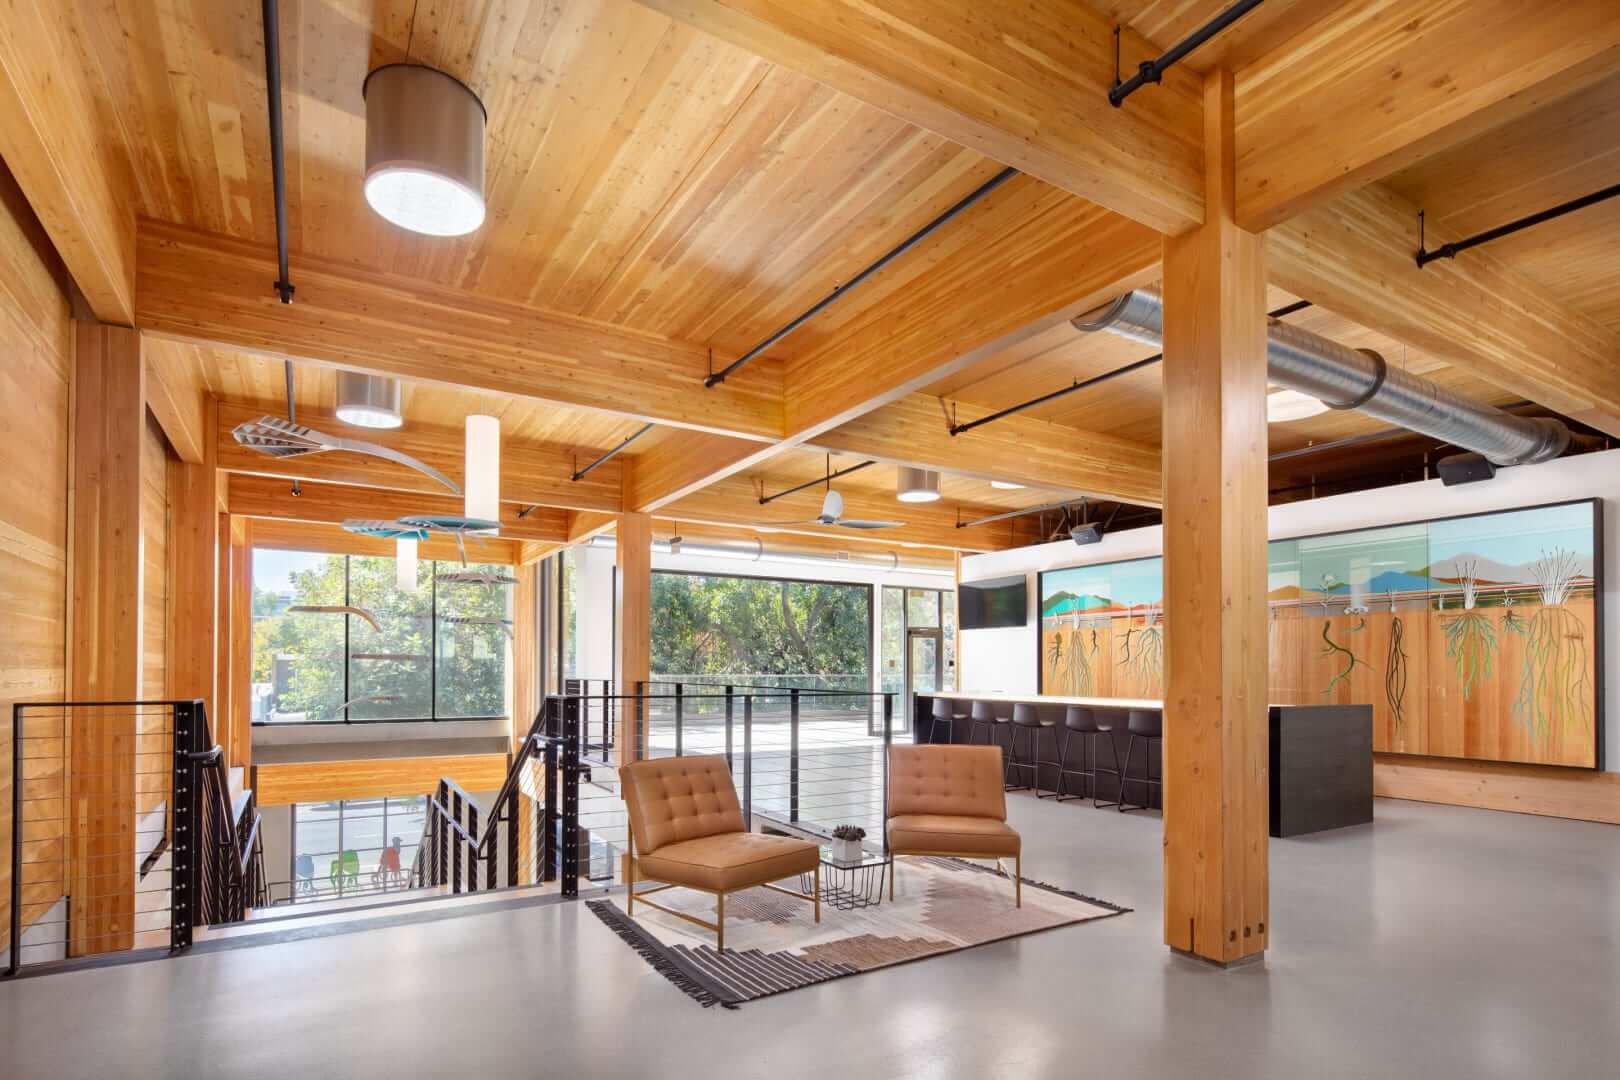 timber-framed interior of an office